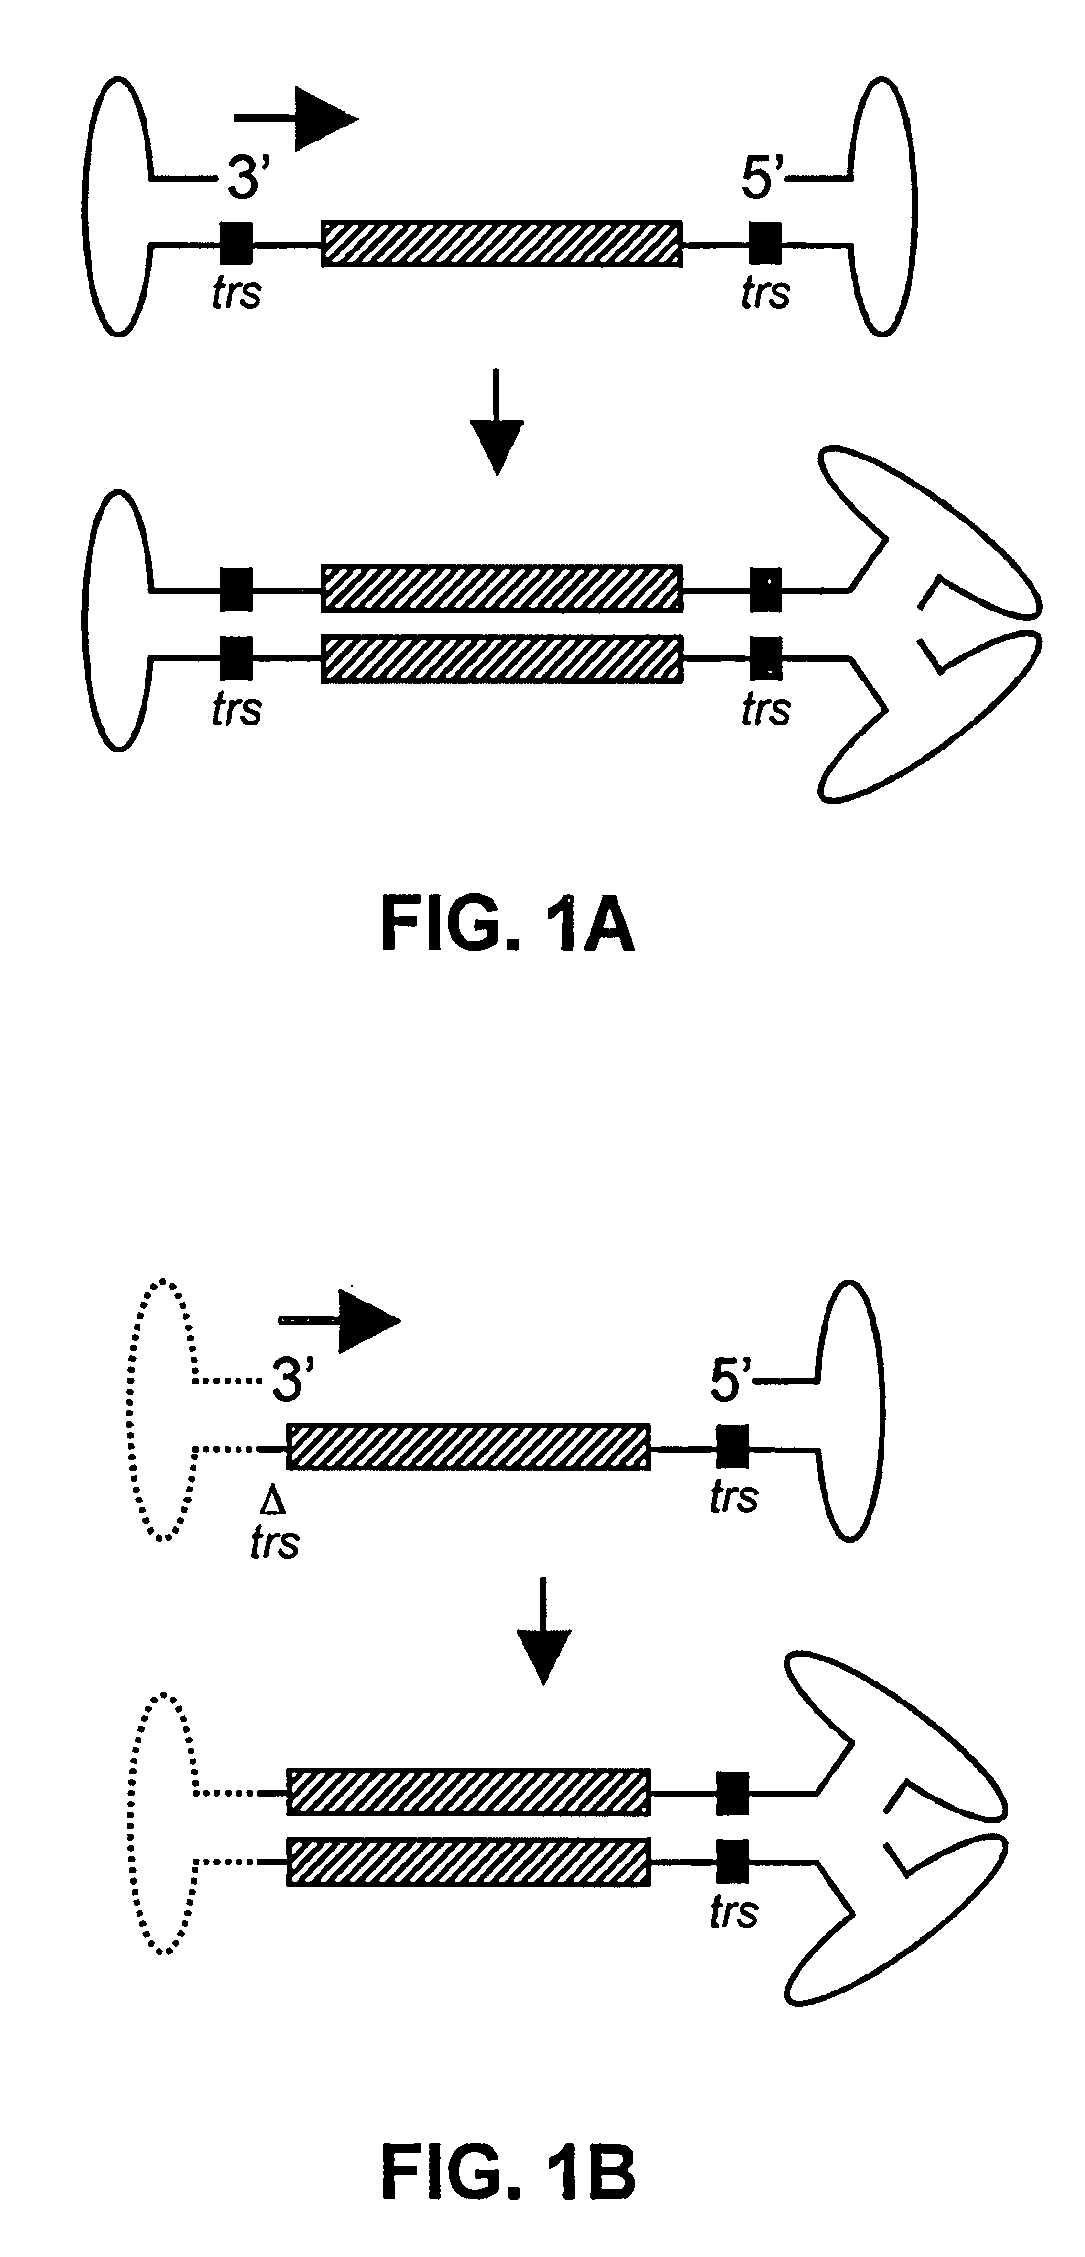 Self-complementary parvoviral vectors, and methods for making and using the same